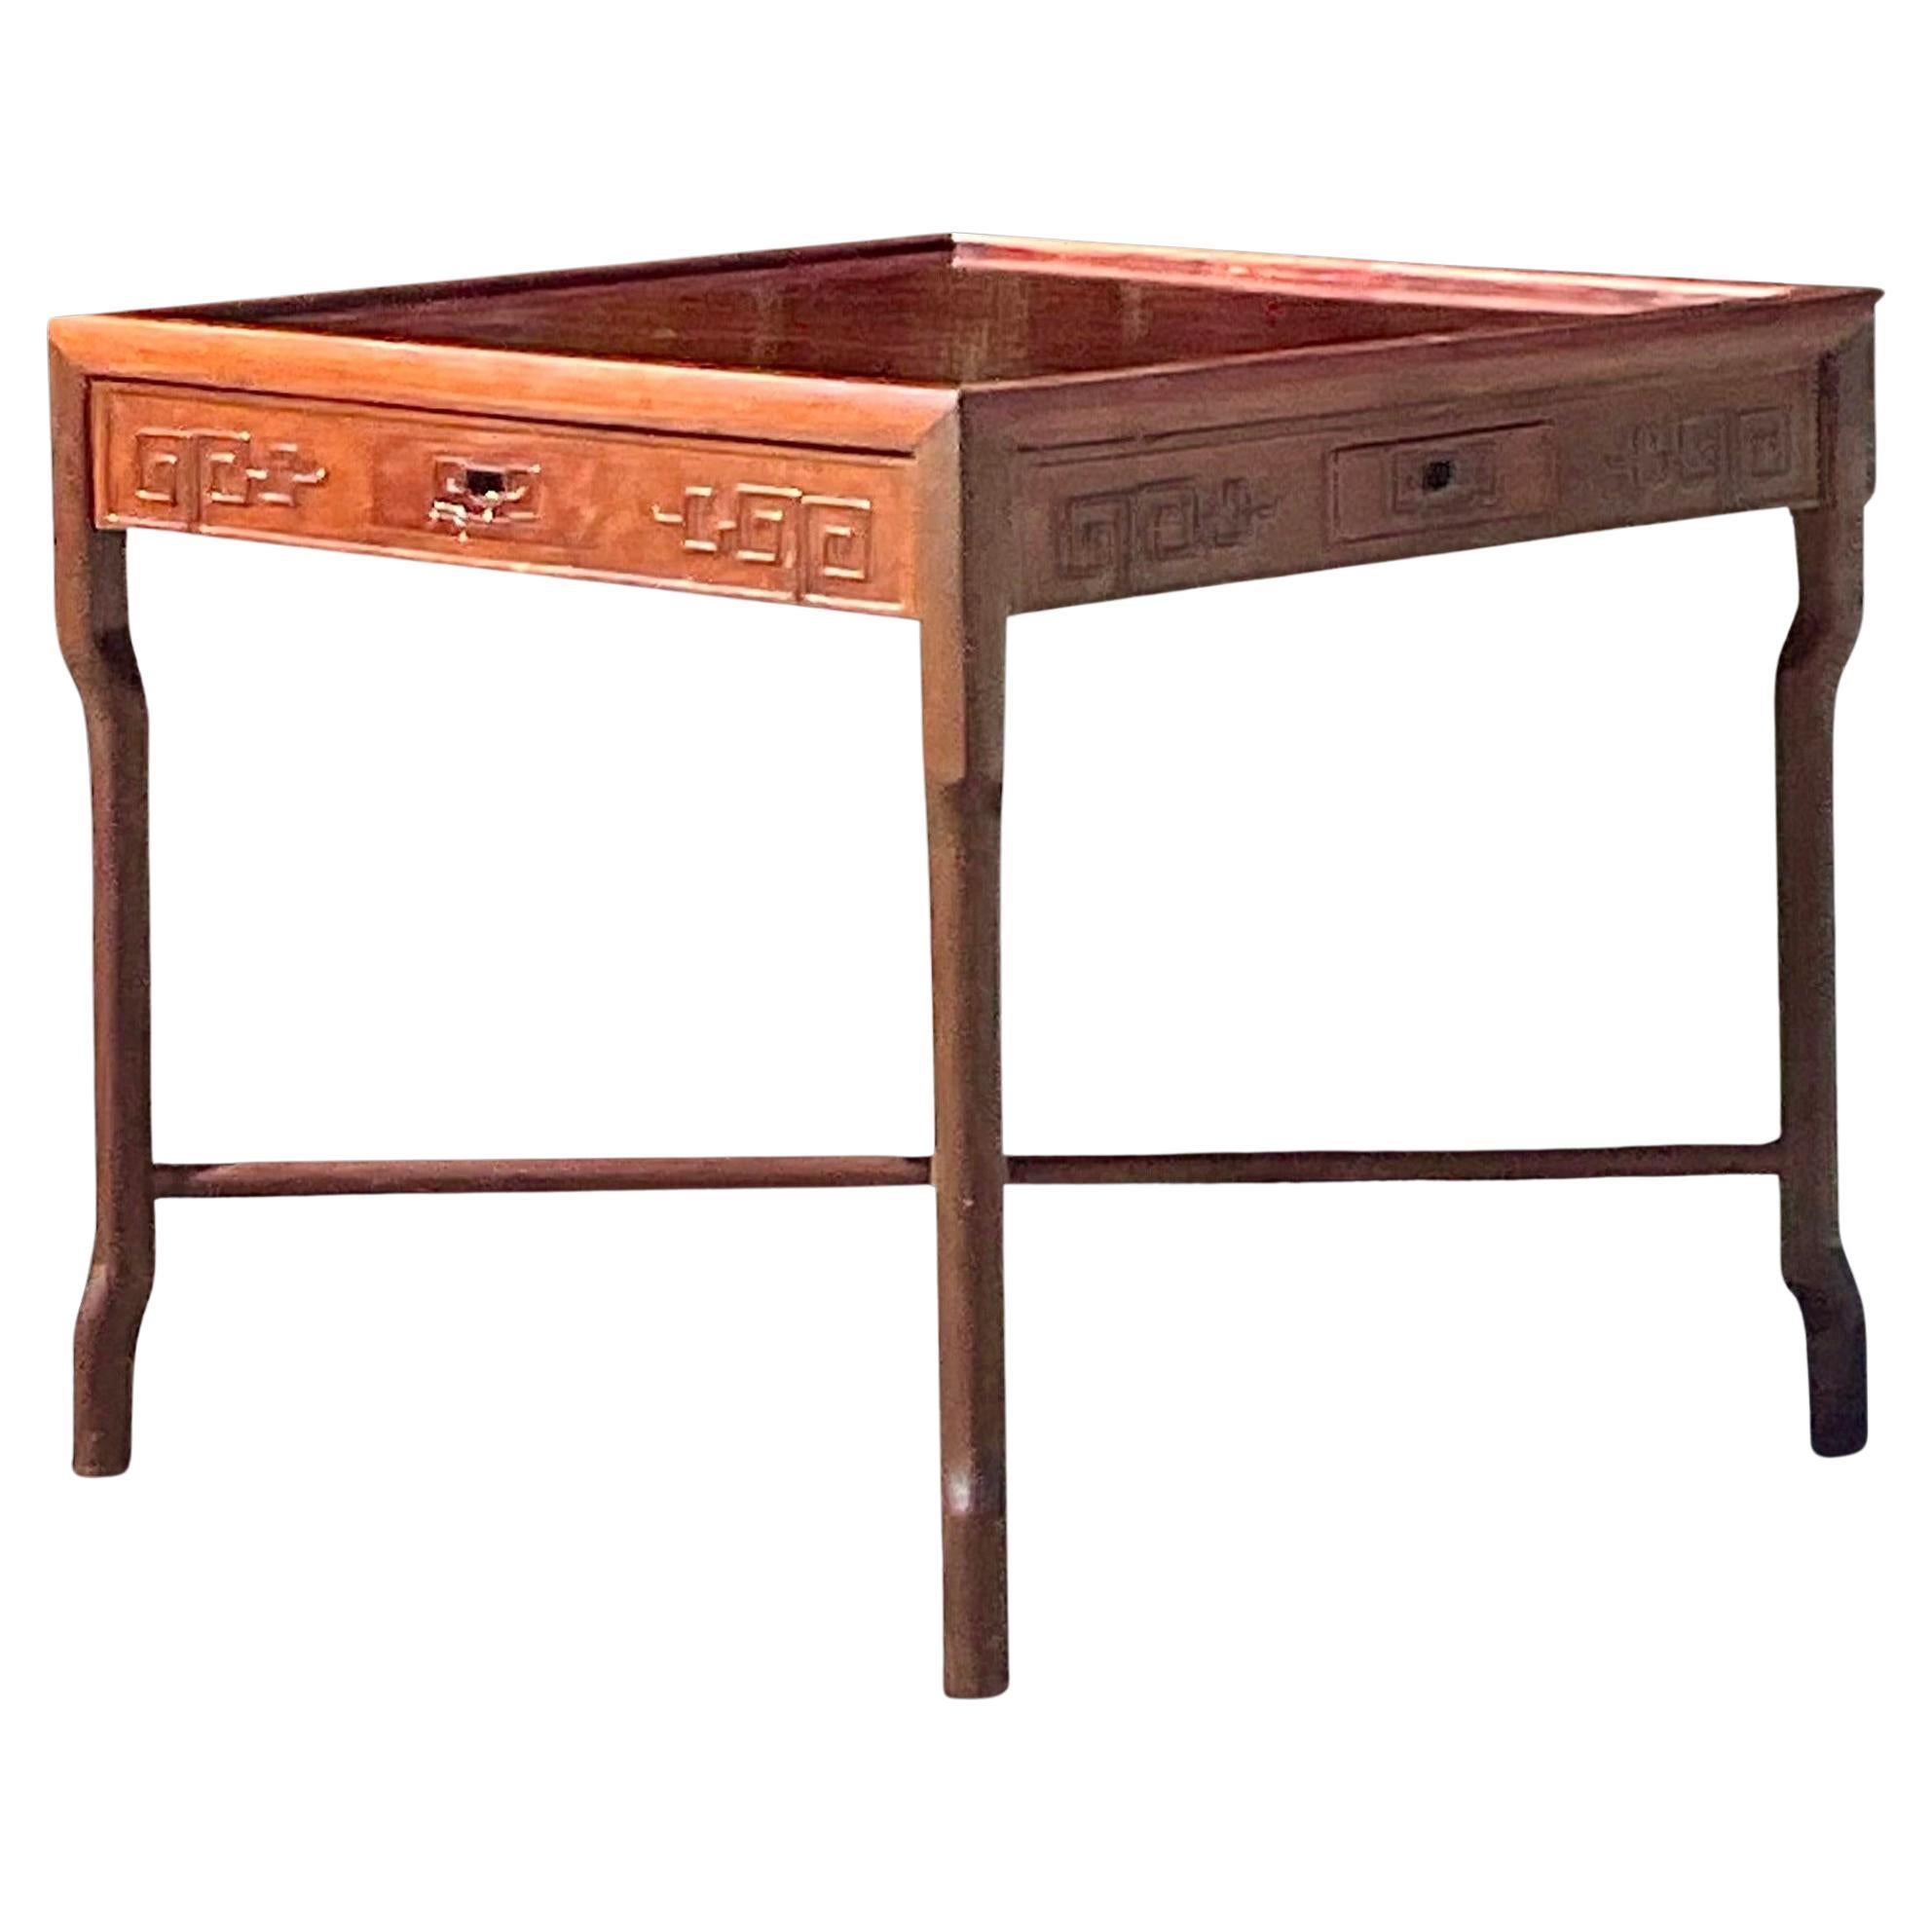 Late 20th Century Vintage Asian Fretwork Game Table For Sale